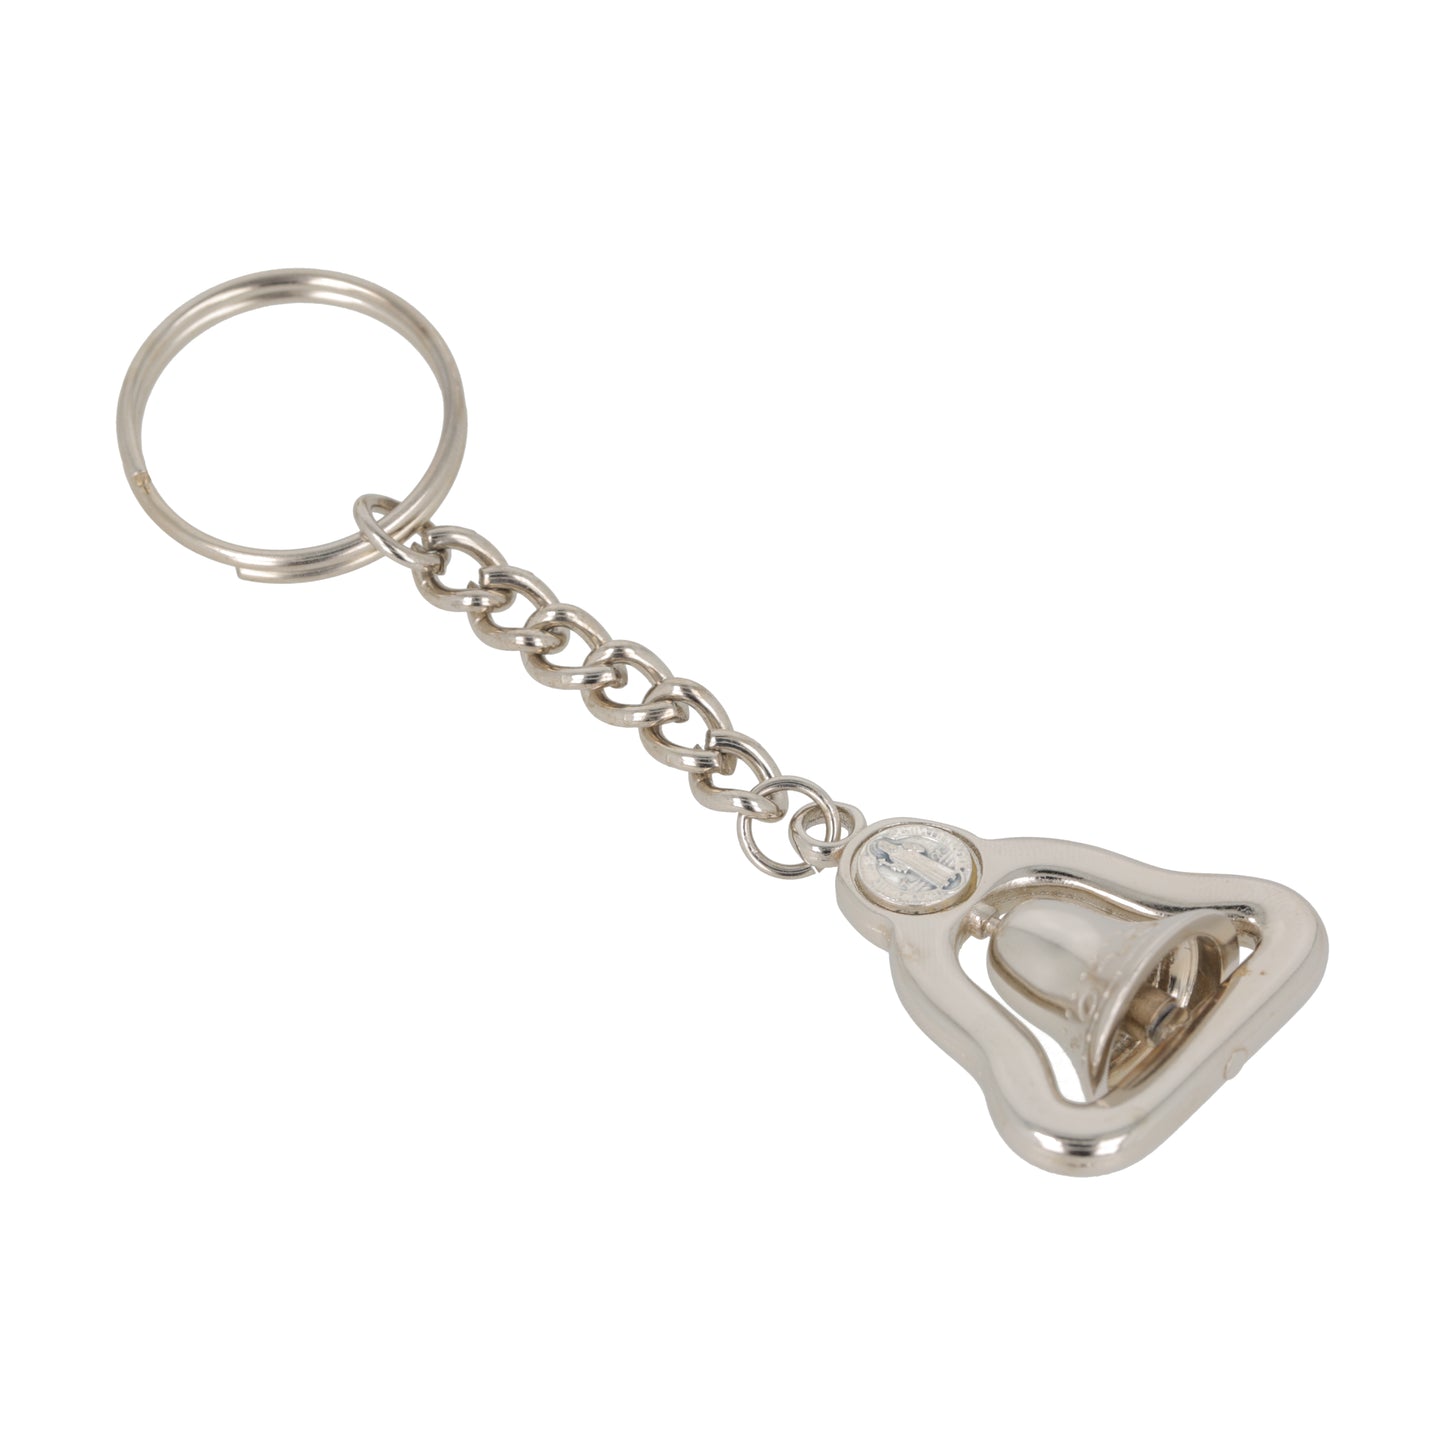 Keychain Bell San Benito Nickel Plated . Souvenirs from Italy